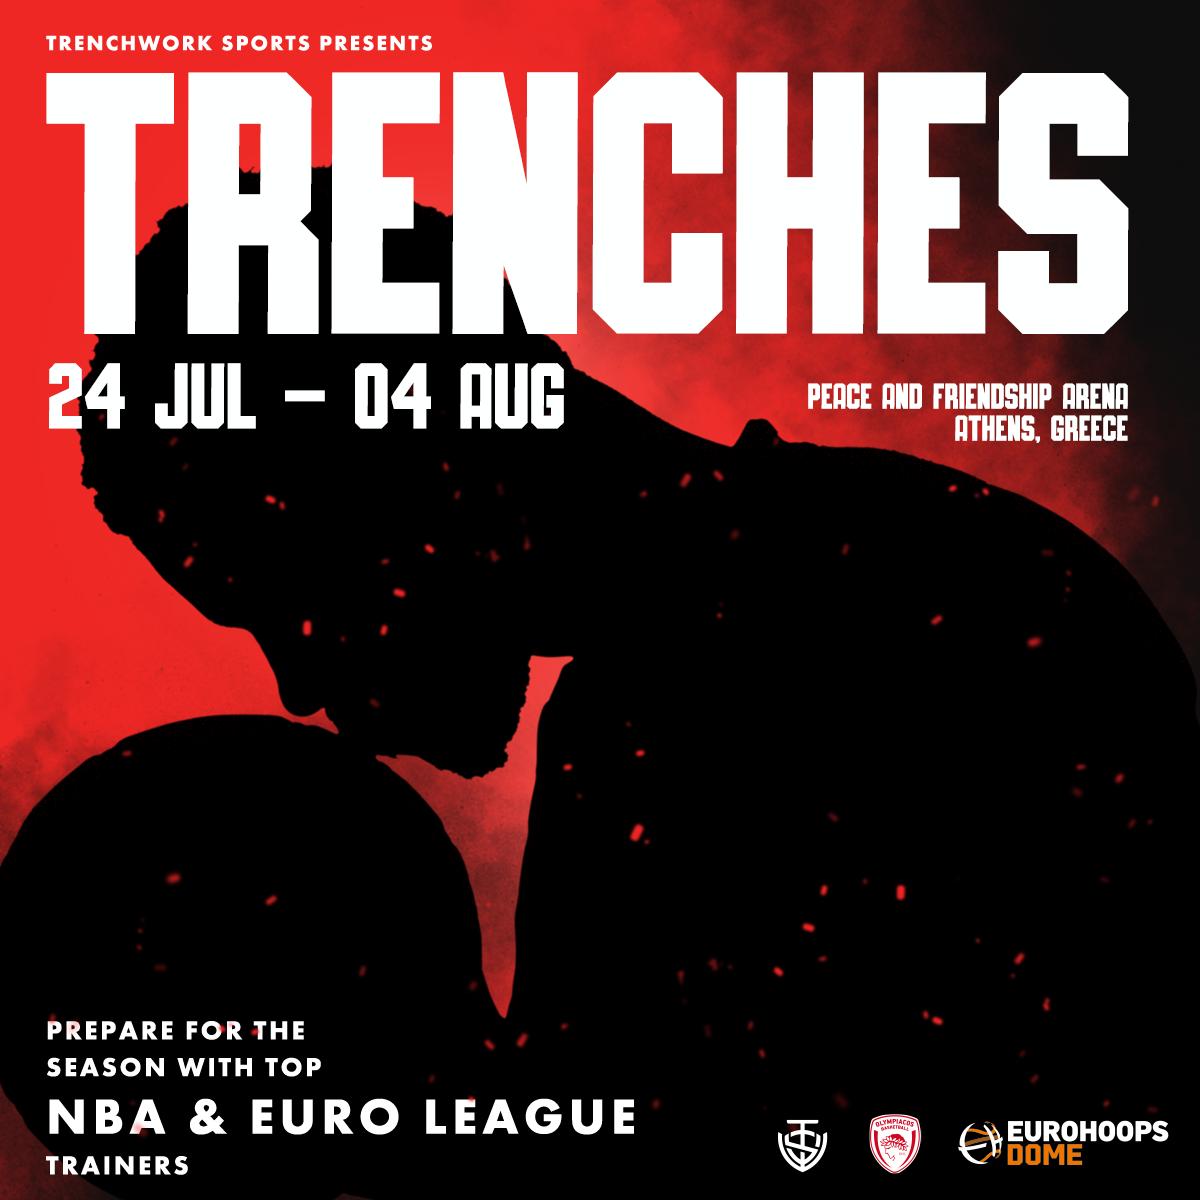 TrenchWork Sports is a basketball academy that offers a camp for professional players.  This camp was created to prepare for the season with the best NBA and Euroleague coaches in the world.